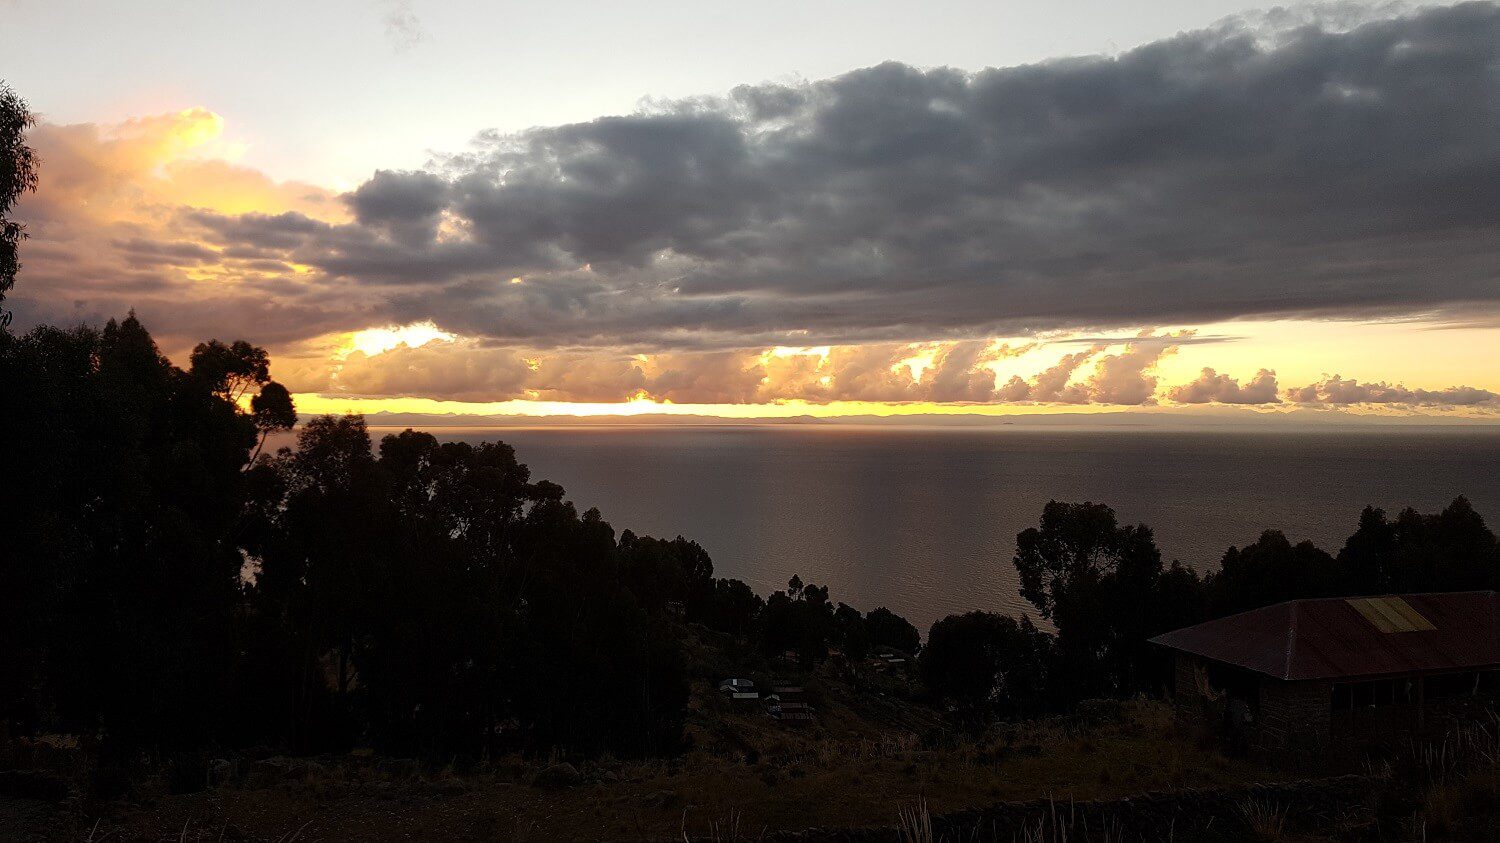 Sunset over Lake Titicaca as seen from Taquile island, Peru. RESPONSible Travel Peru